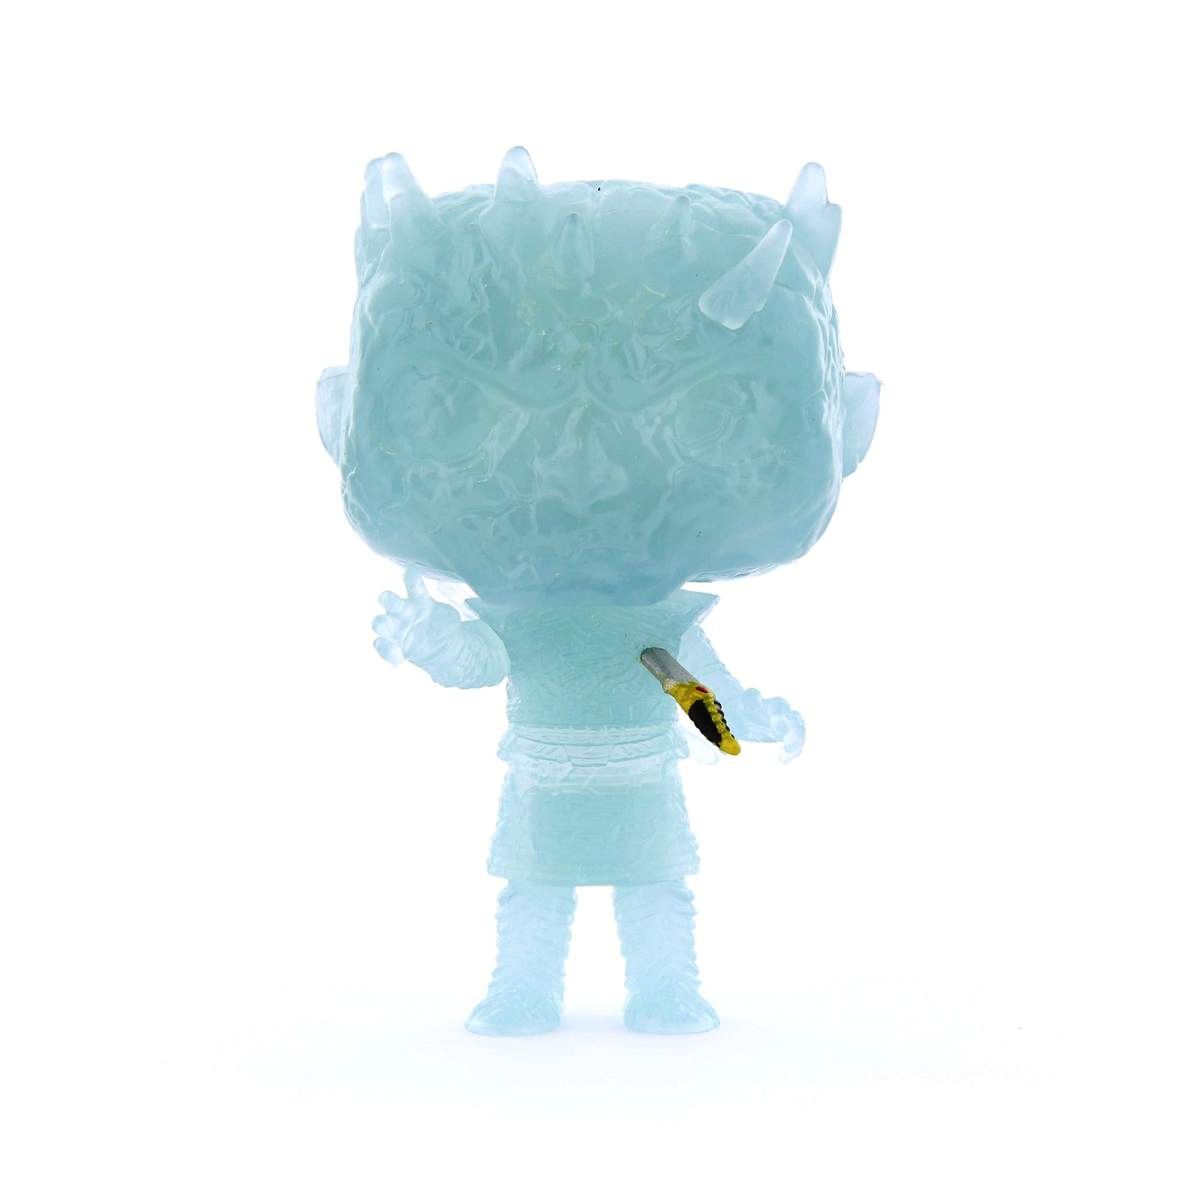 Funko Pop Tv Game of Thrones Crystal Night King with Dagger In Chest Vinyl Figure Exc